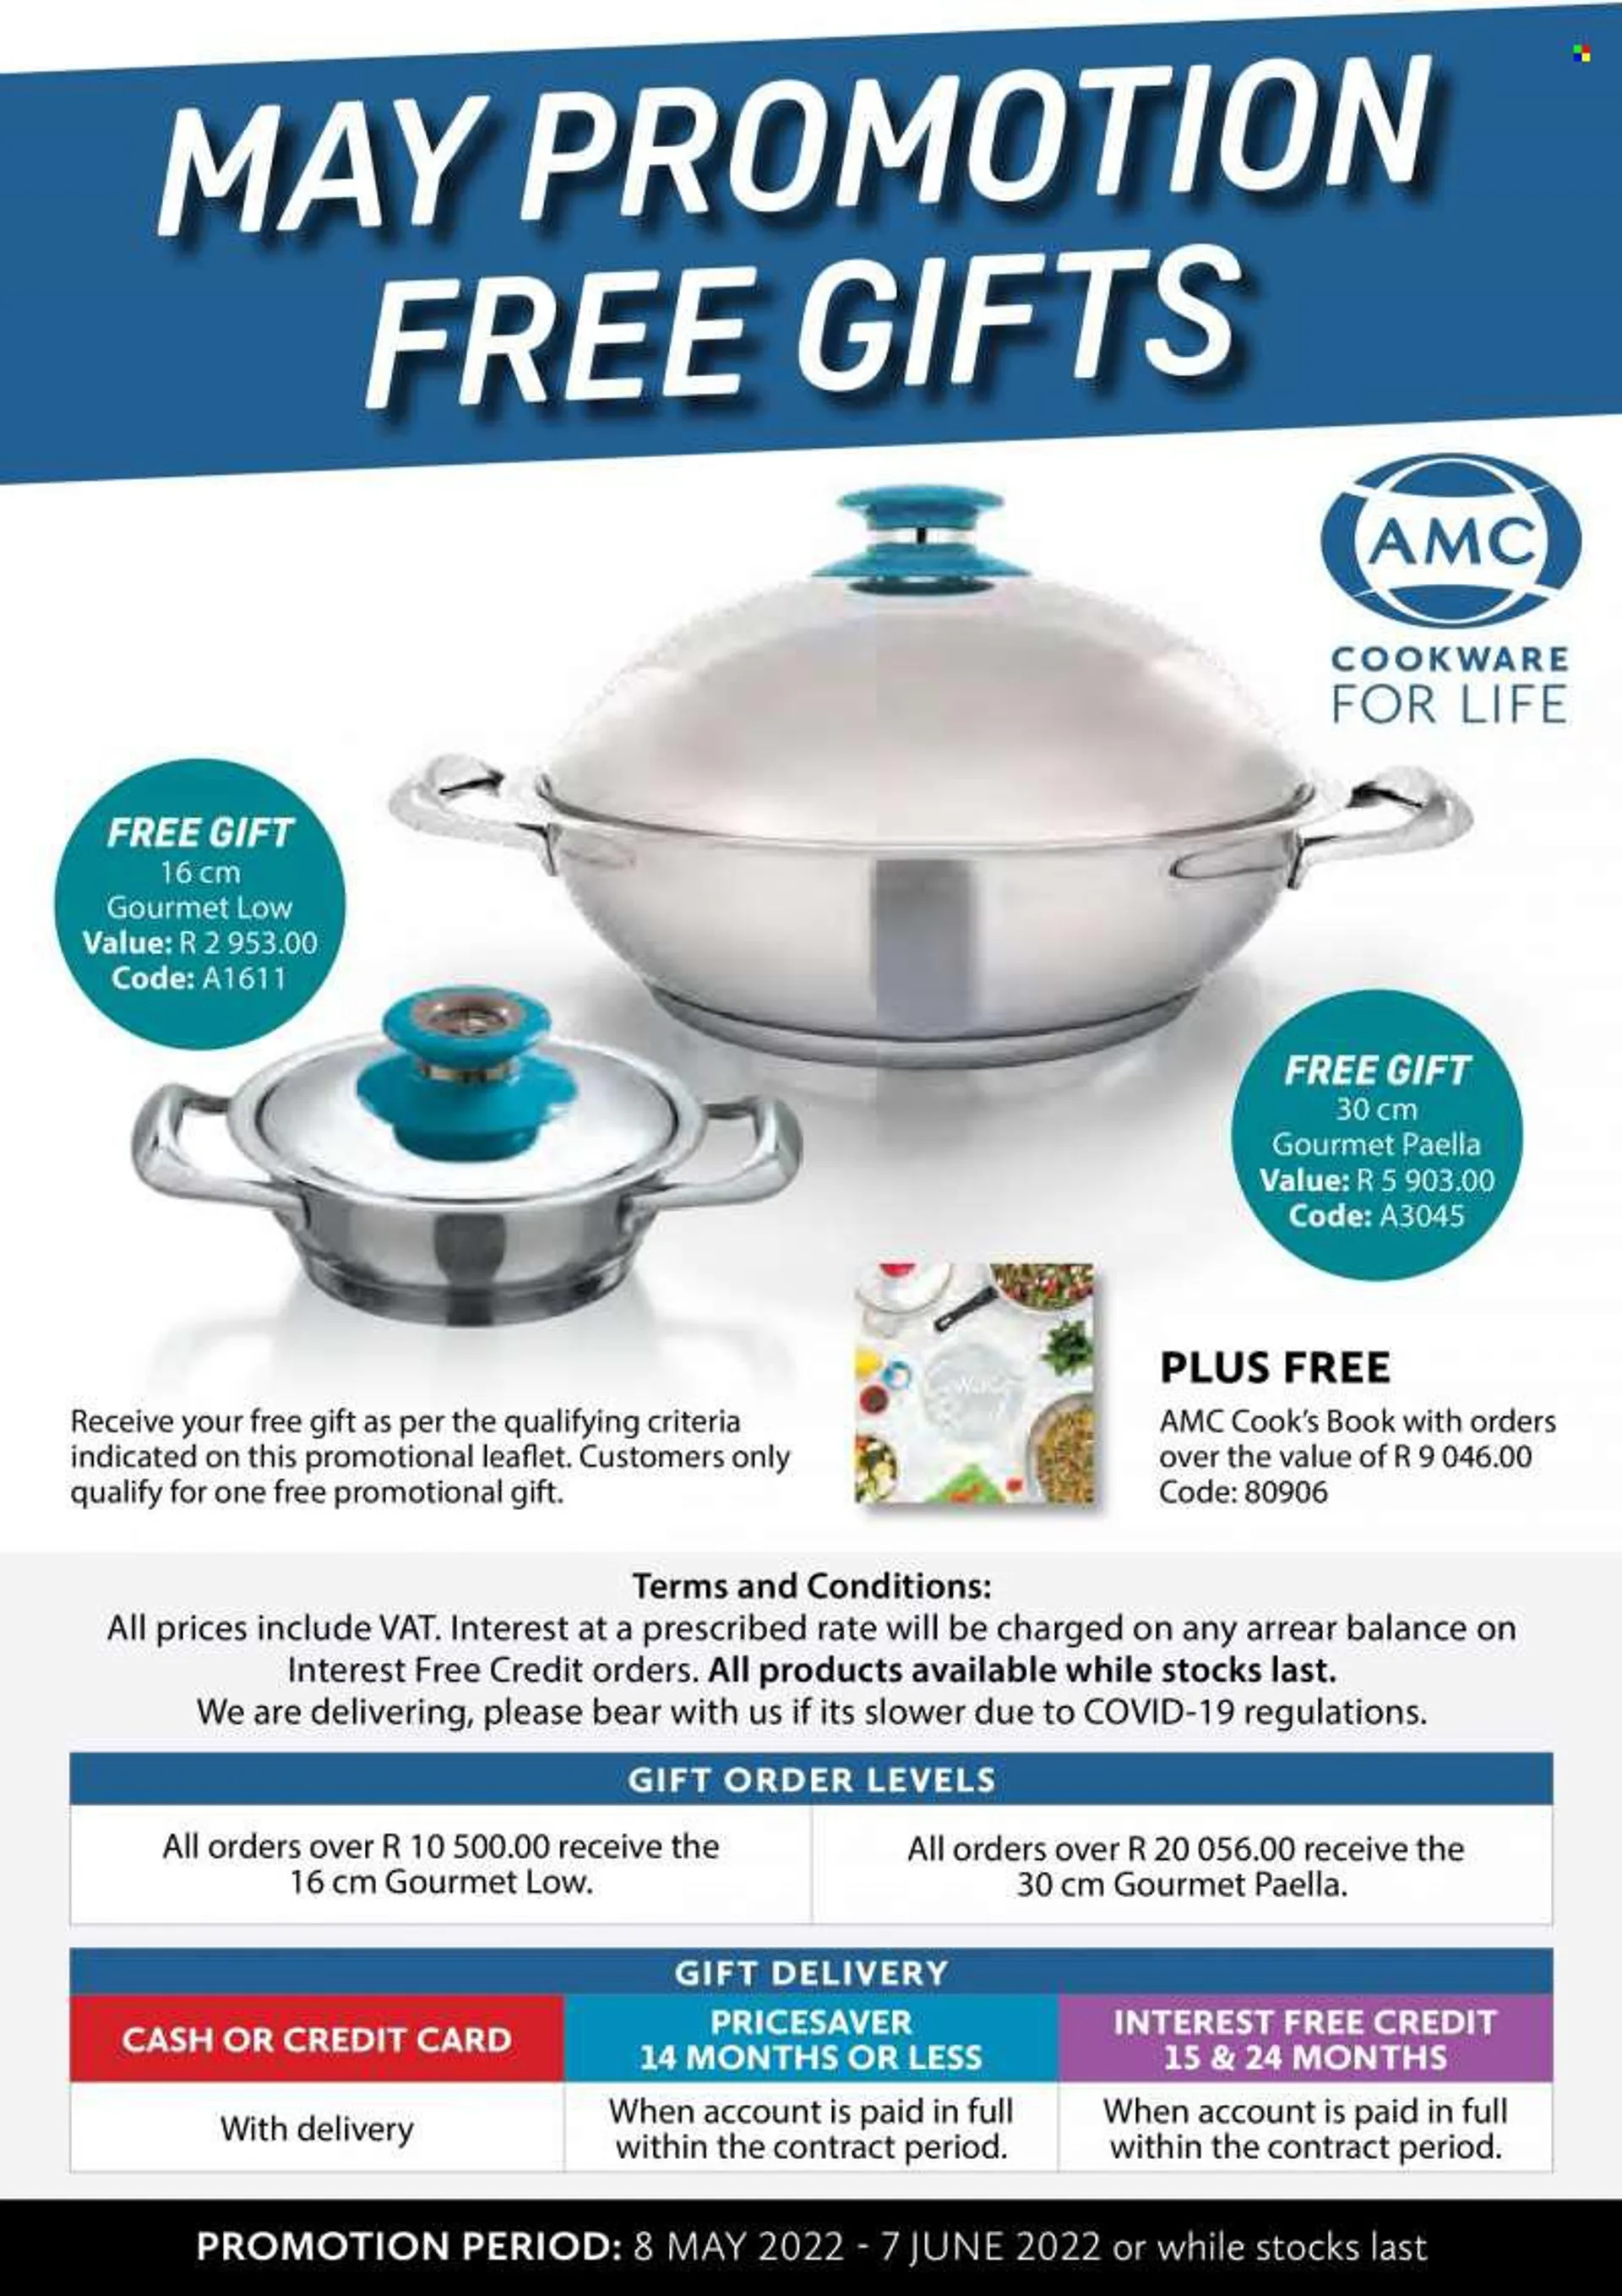 AMC Cookware catalogue  - 08/05/2022 - 07/06/2022. - 8 May 7 June 2022 - Page 2